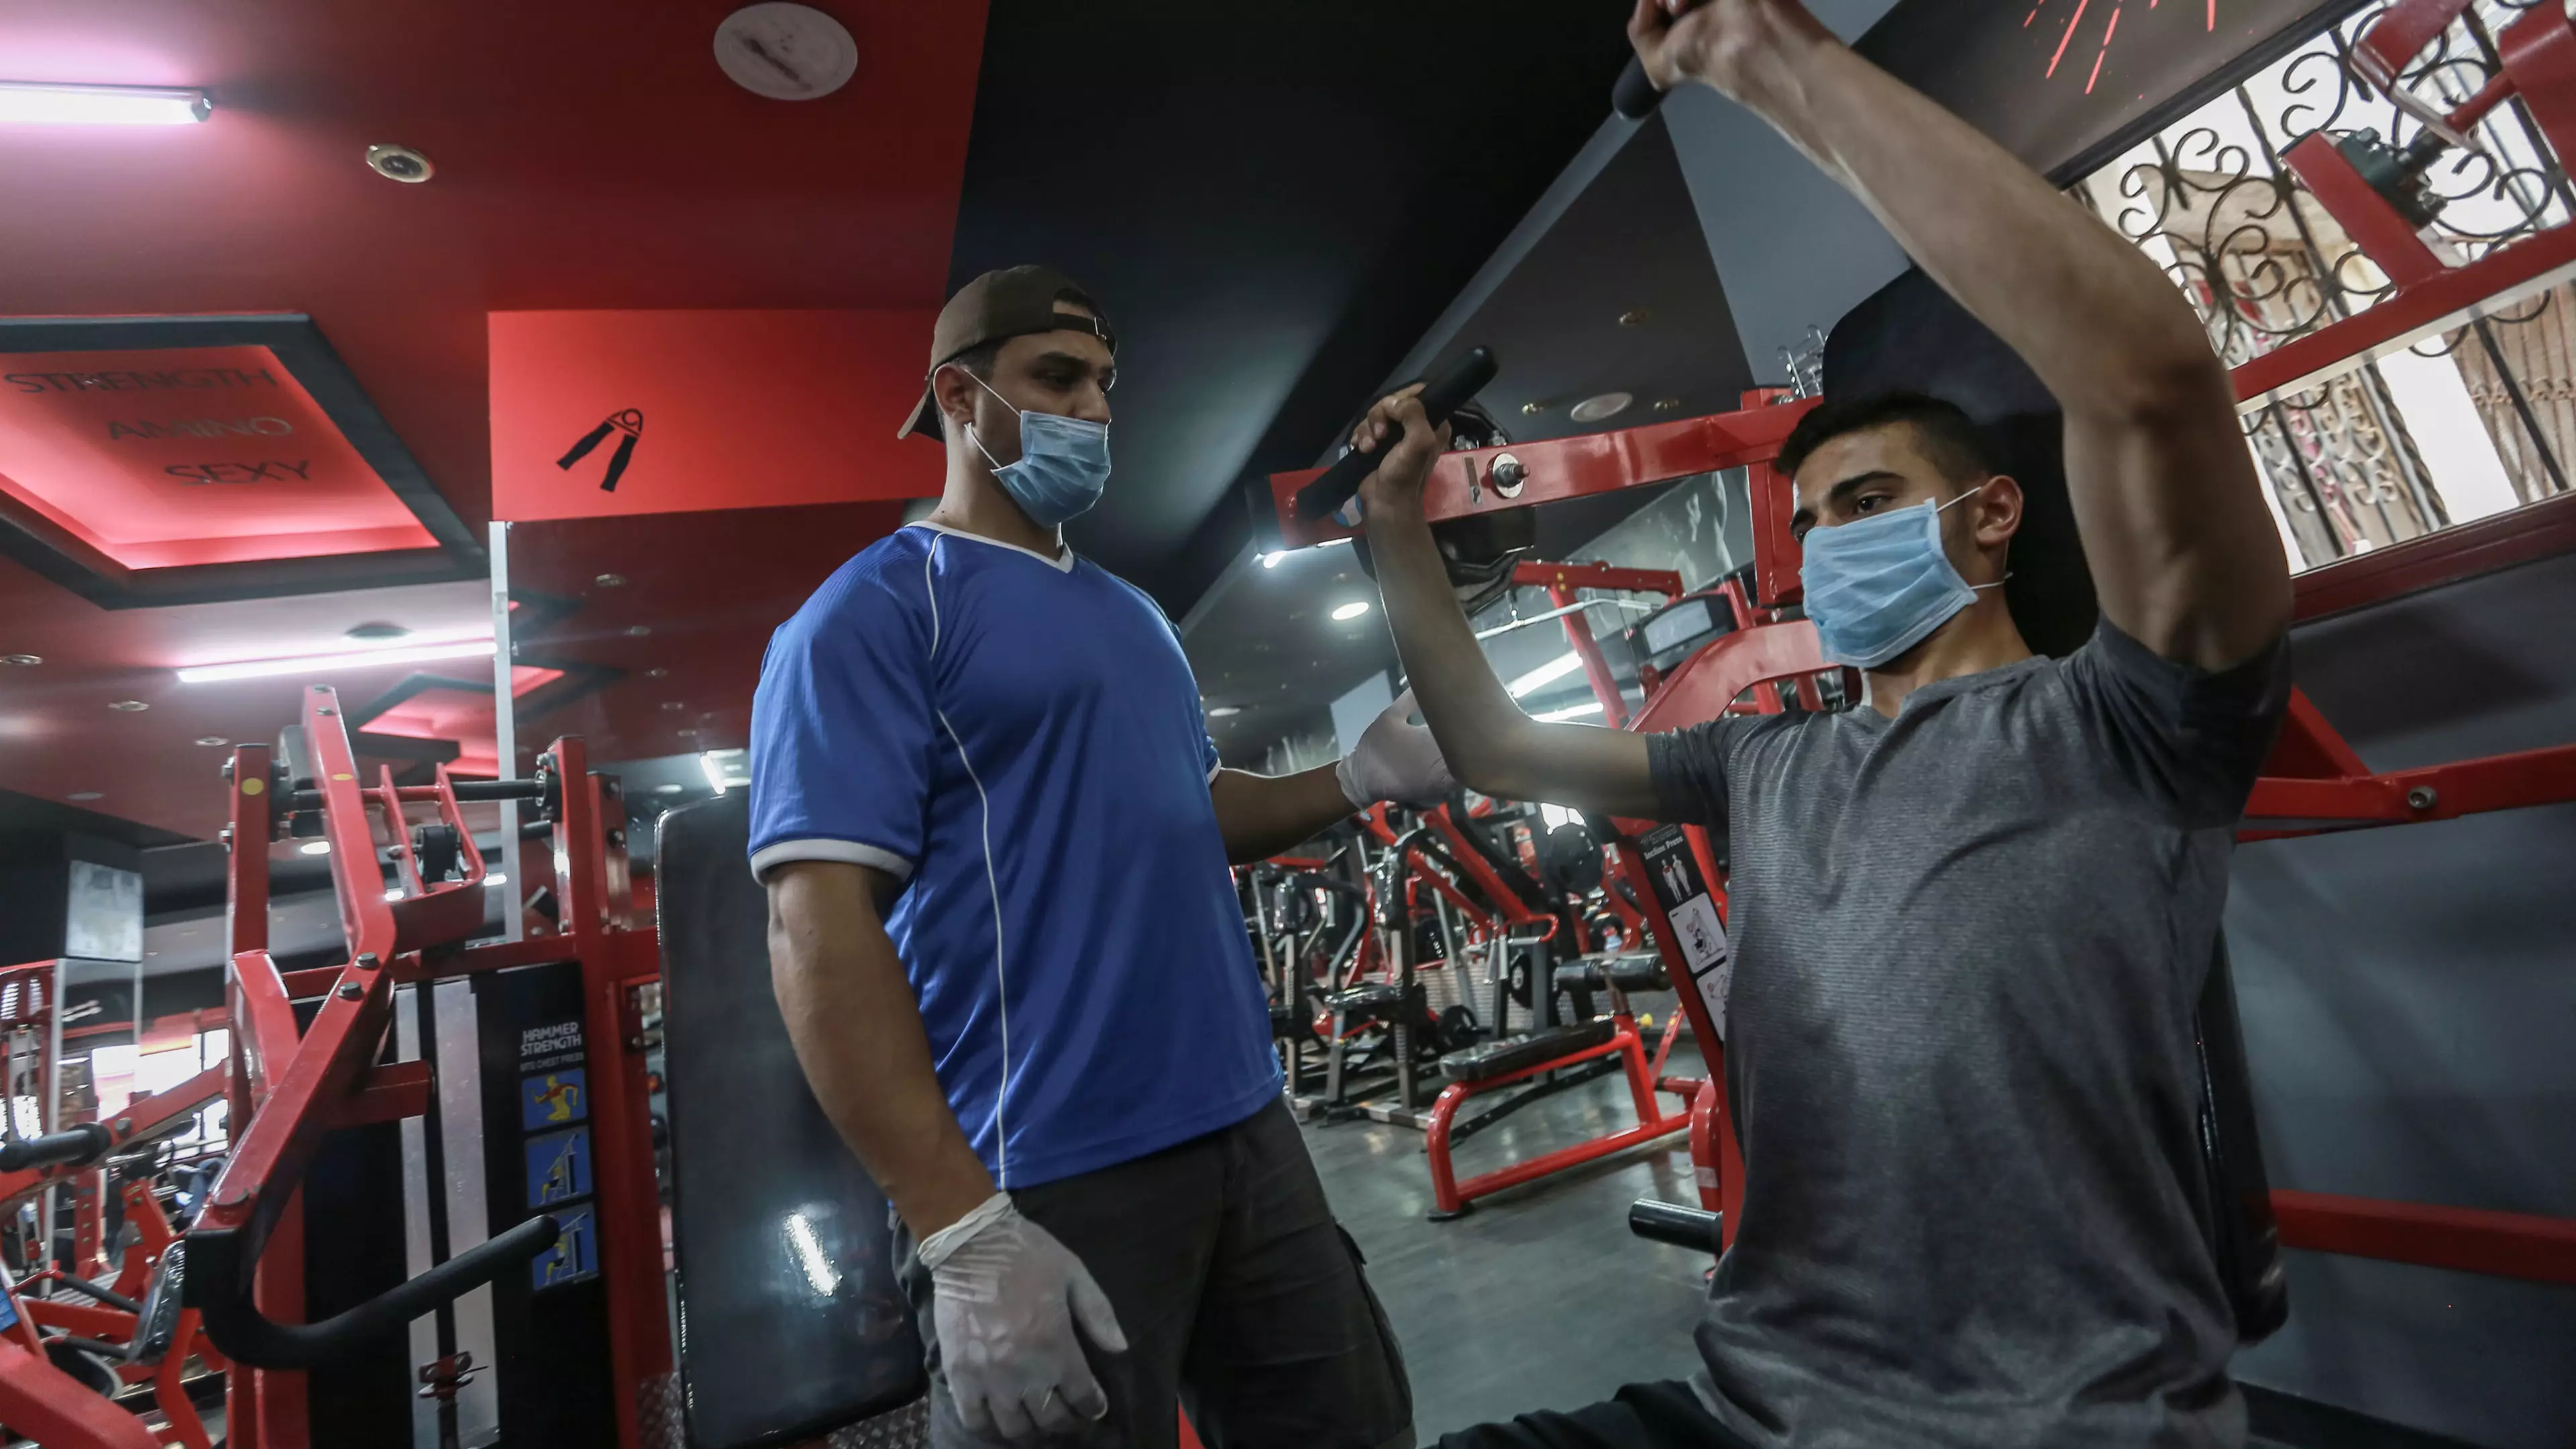 Masks 'Not Expected' To Be Mandatory In Gyms And Fitness Clubs